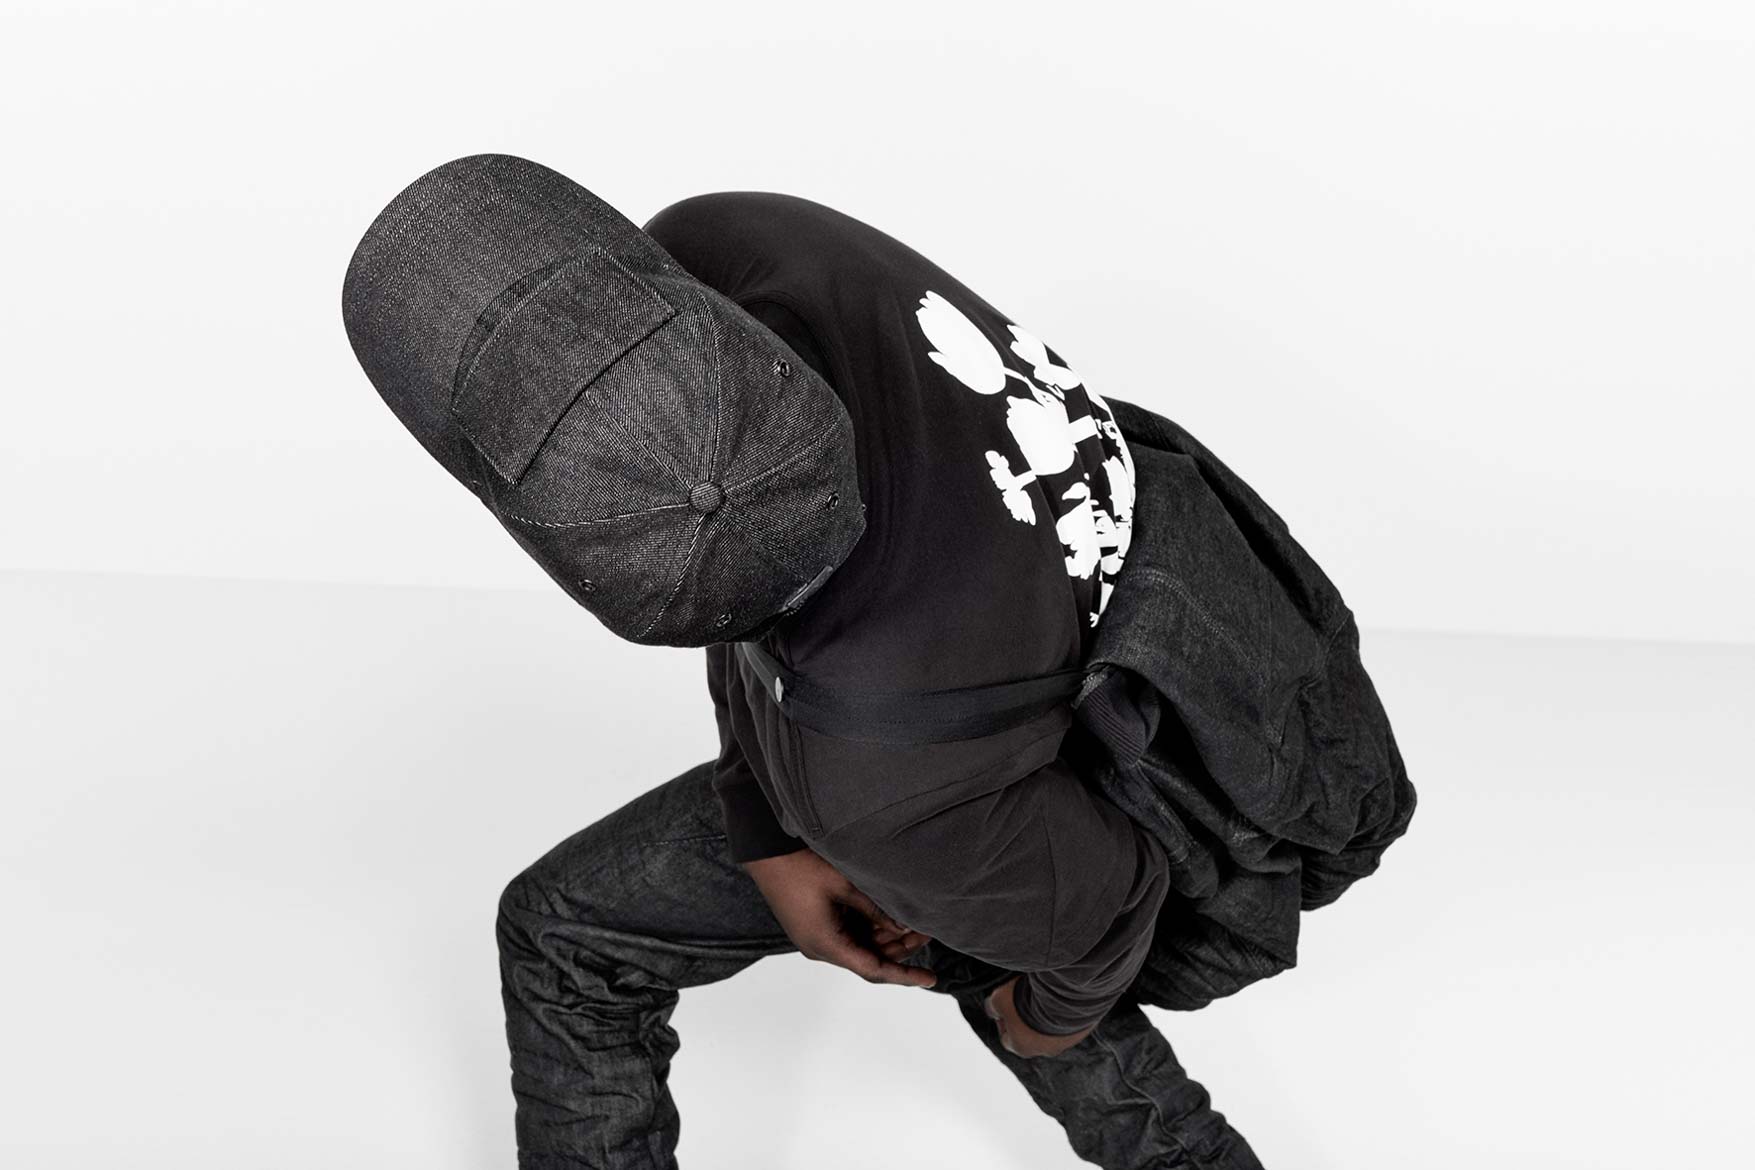 G-STAR-RAW-RESEARCH-II-BY-AITOR-THROUP-1